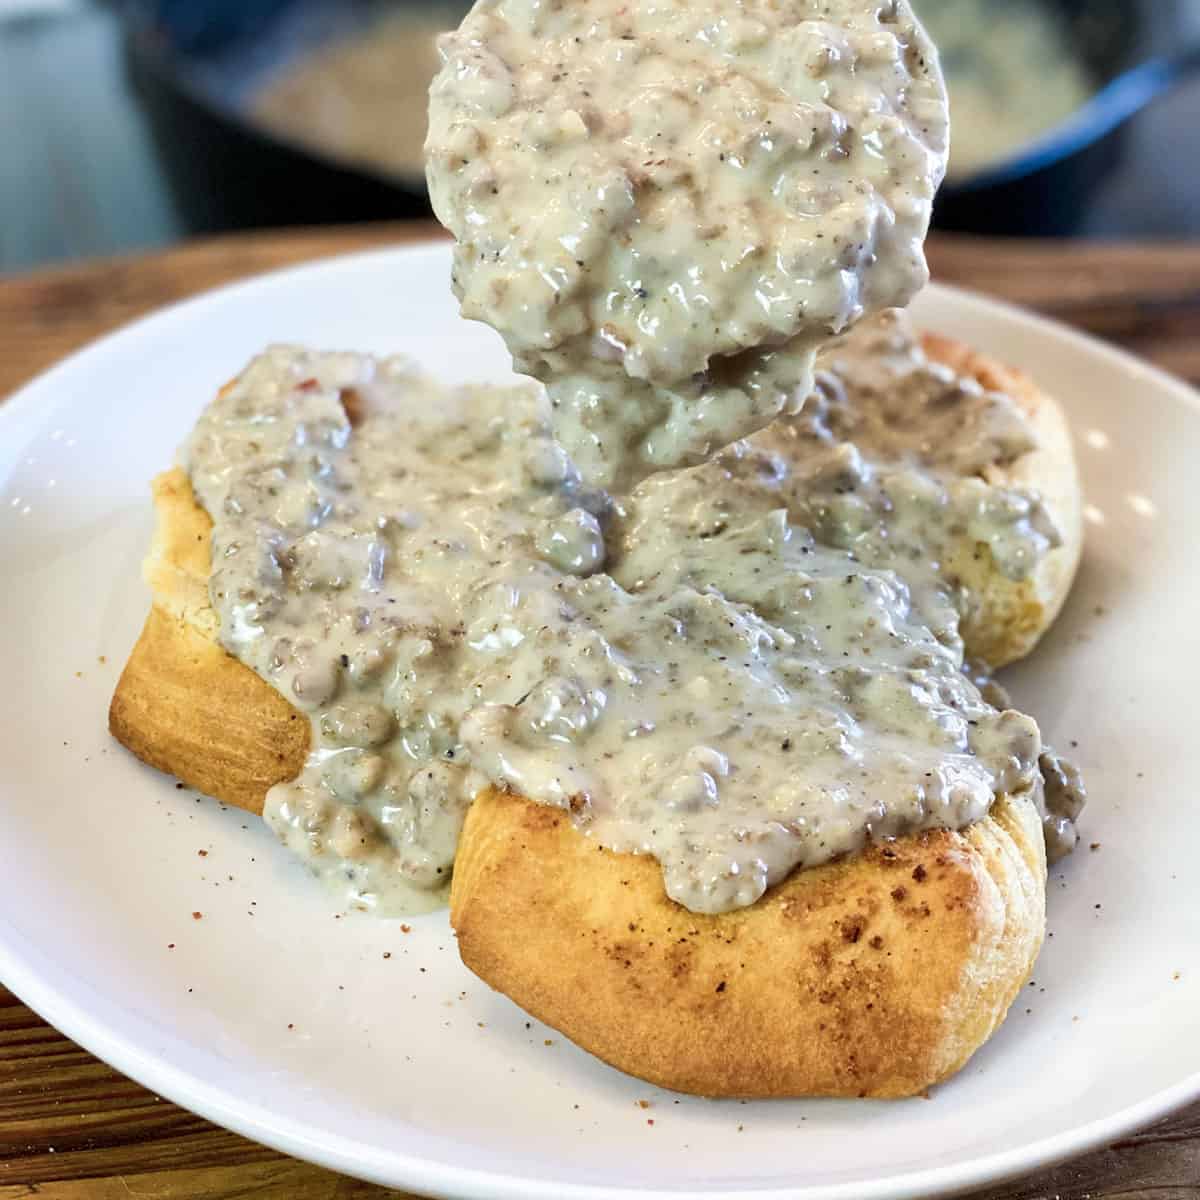 Stovetop Sausage Gravy And Biscuits Sunday Supper Movement,Vinegar Based Bbq Sauce Recipe For Chicken